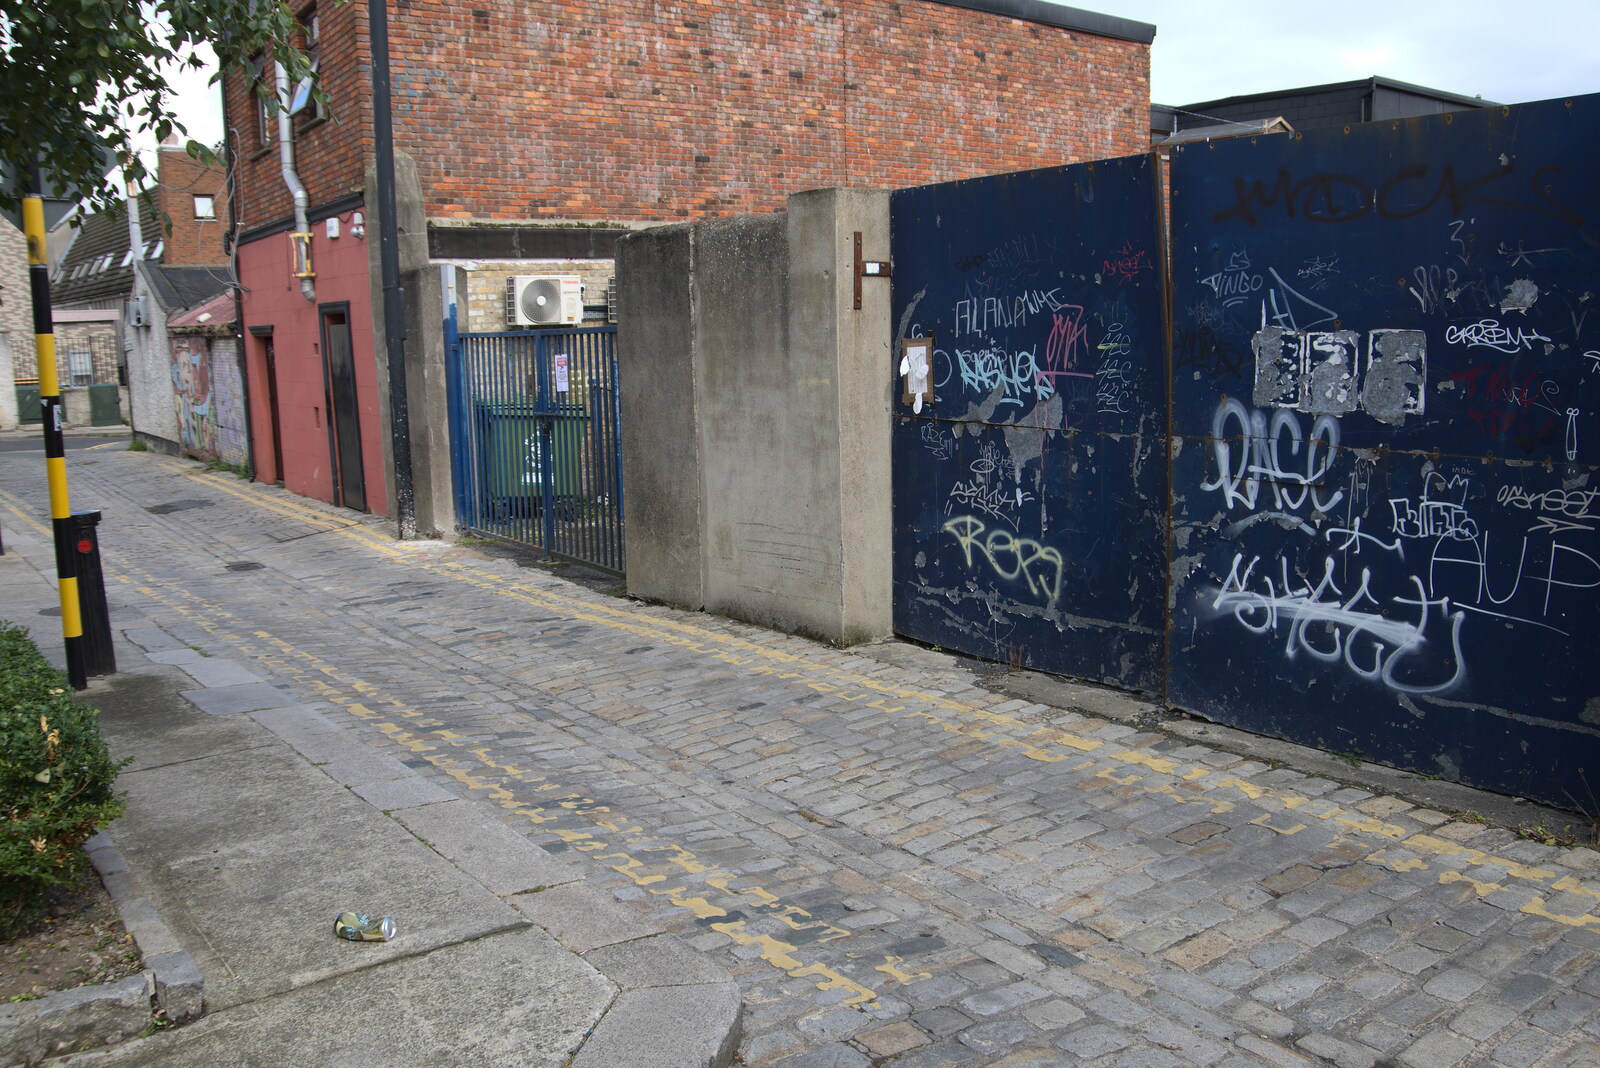 More backstreet graffiti from Manorhamilton and the Street Art of Dún Laoghaire, Ireland - 15th August 2021